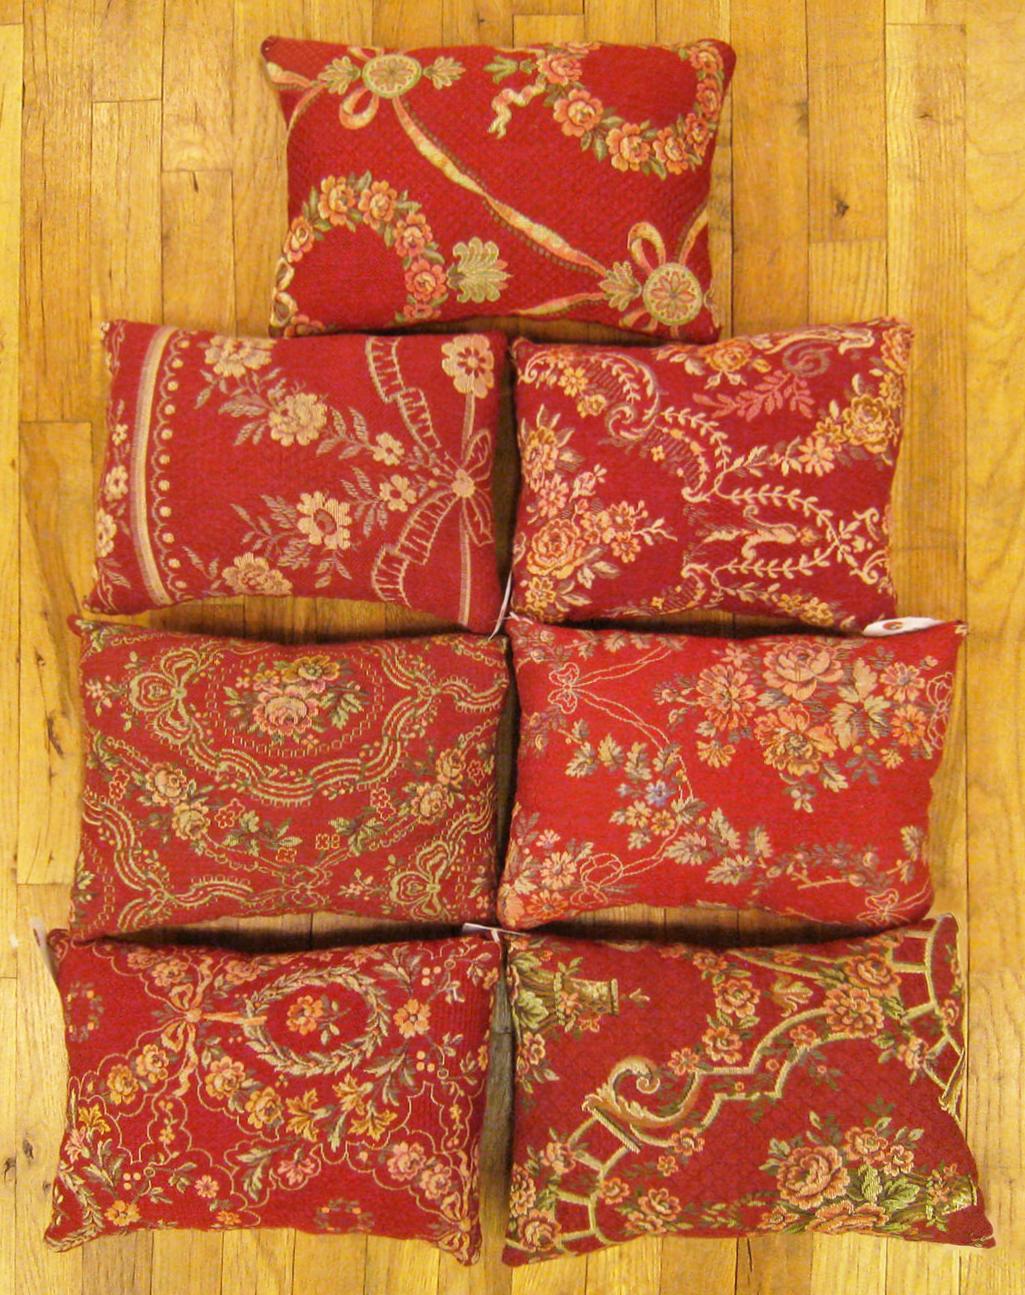 A Set of Antique Jacquard Tapestry Pillows ; size 1'0” x 1'3” and 1'0” x 1'2” and 1'0” x 1'3”.

An antique decorative pillows with floral elements allover a red central field, size 1'0